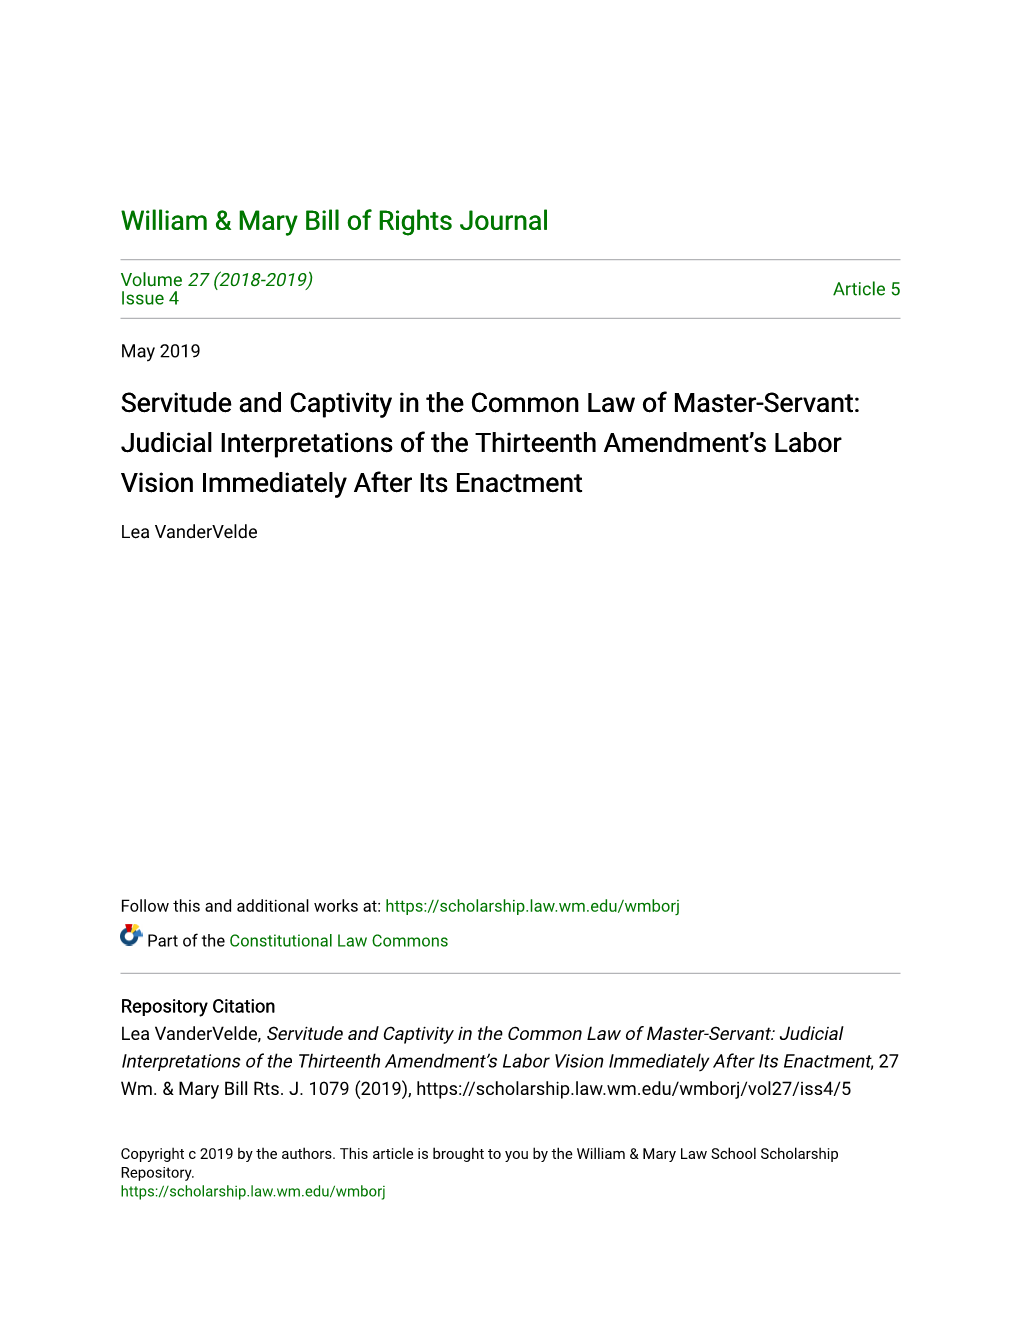 Servitude and Captivity in the Common Law of Master-Servant: Judicial Interpretations of the Thirteenth Amendment’S Labor Vision Immediately After Its Enactment